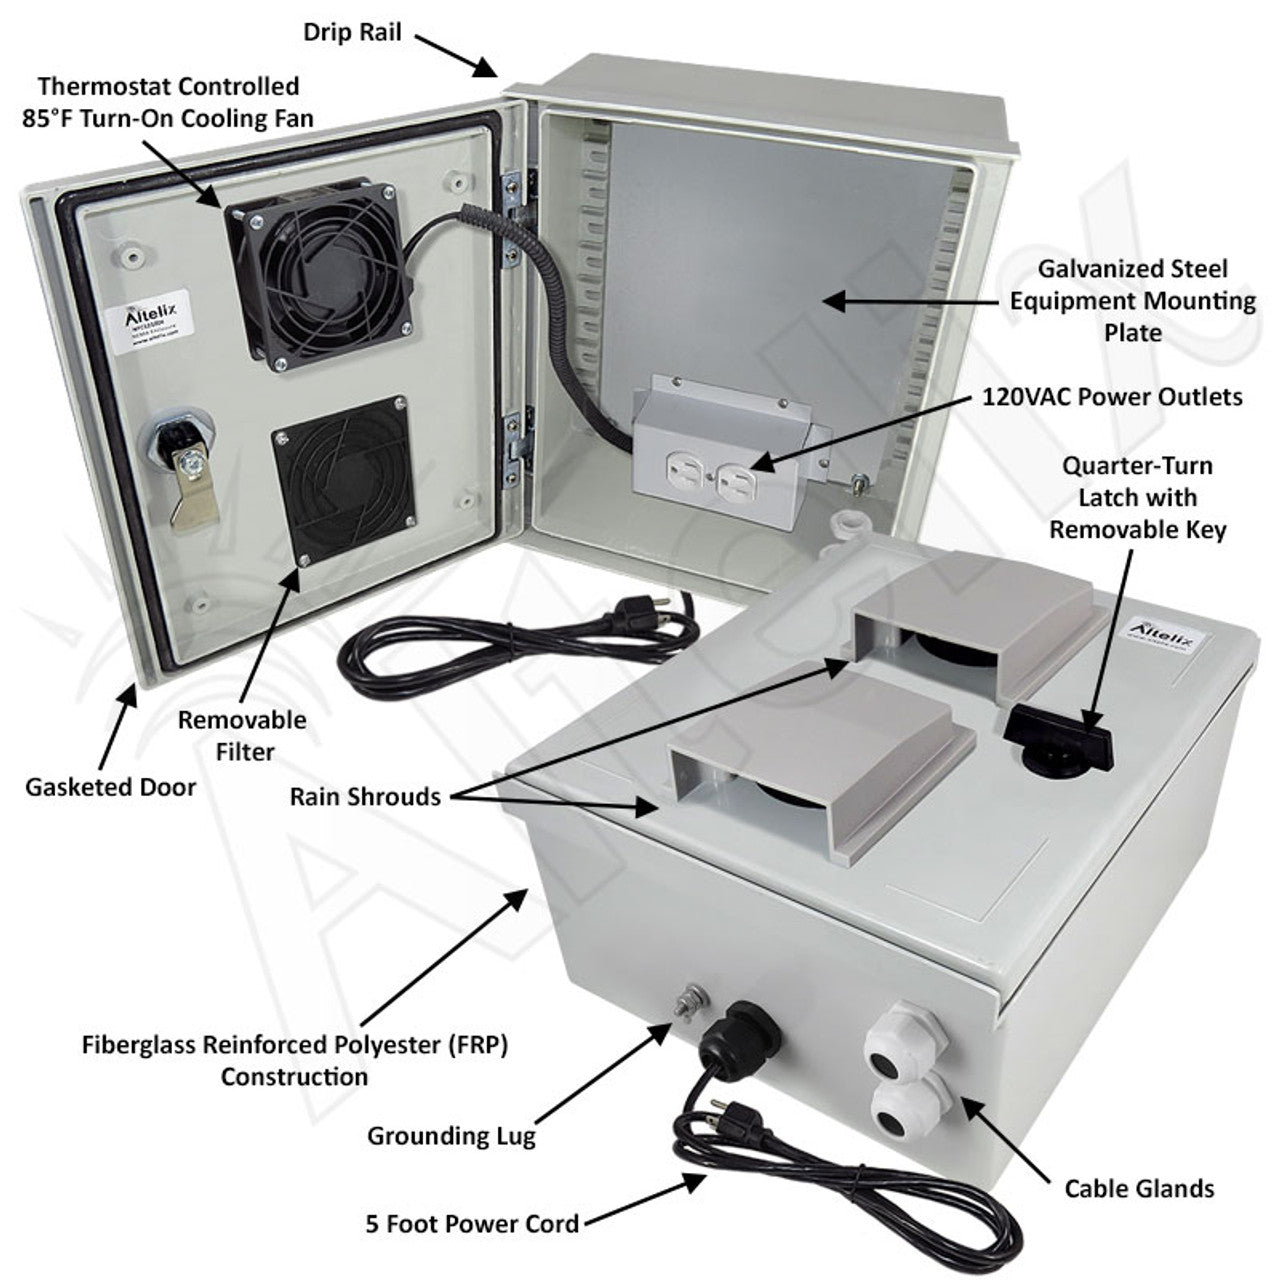 Altelix Vented Fiberglass Weatherproof NEMA Enclosure with 120 VAC Outlets, Power Cord & 85°F Turn-On Cooling Fan - 0